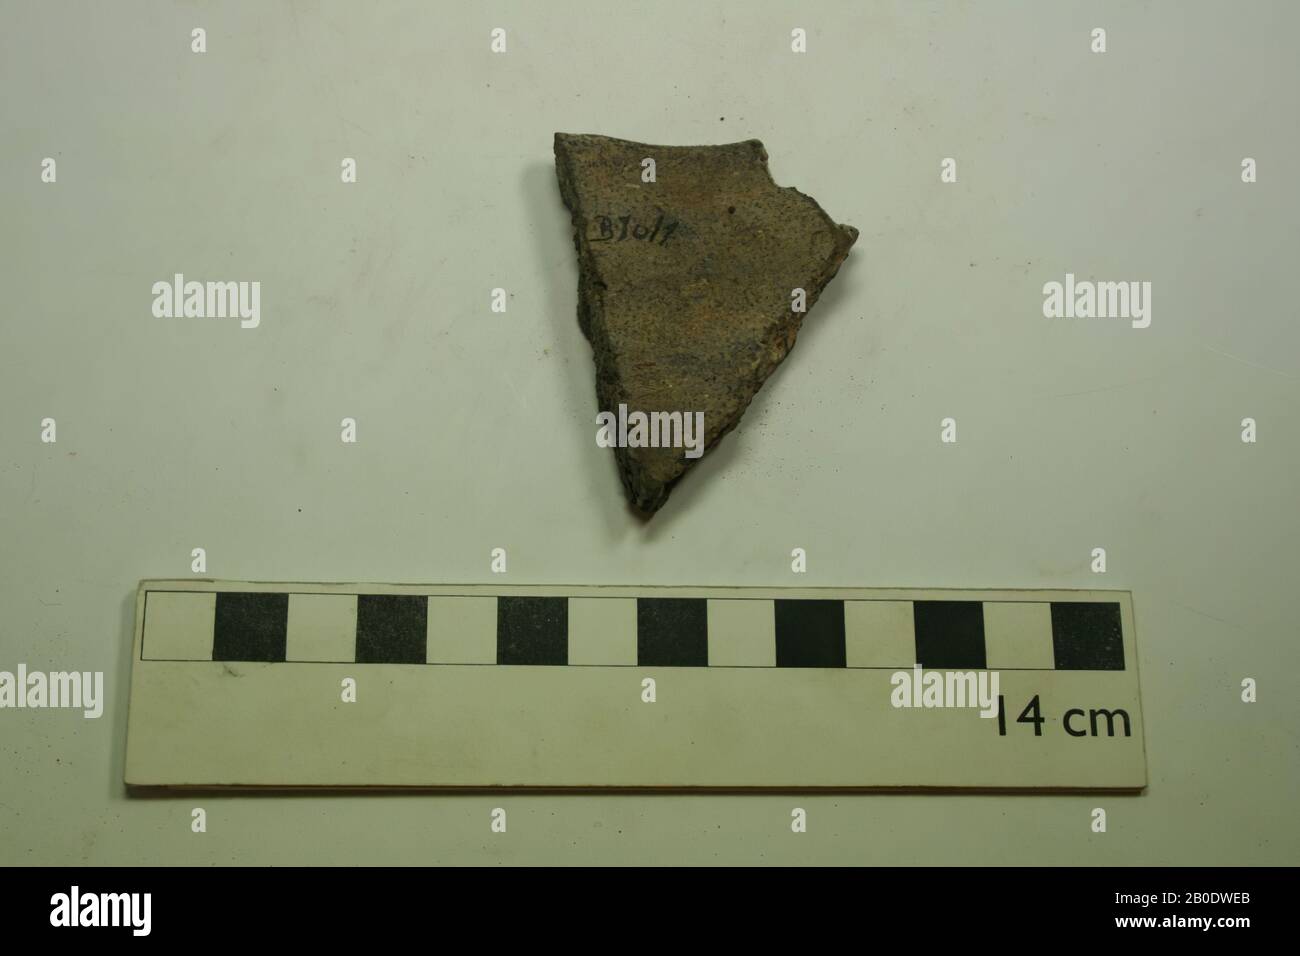 Egypt, shard, earthenware, 6 x 4.5 cm, Meroitic Period, 2nd-4th century A.D, Egypt Stock Photo